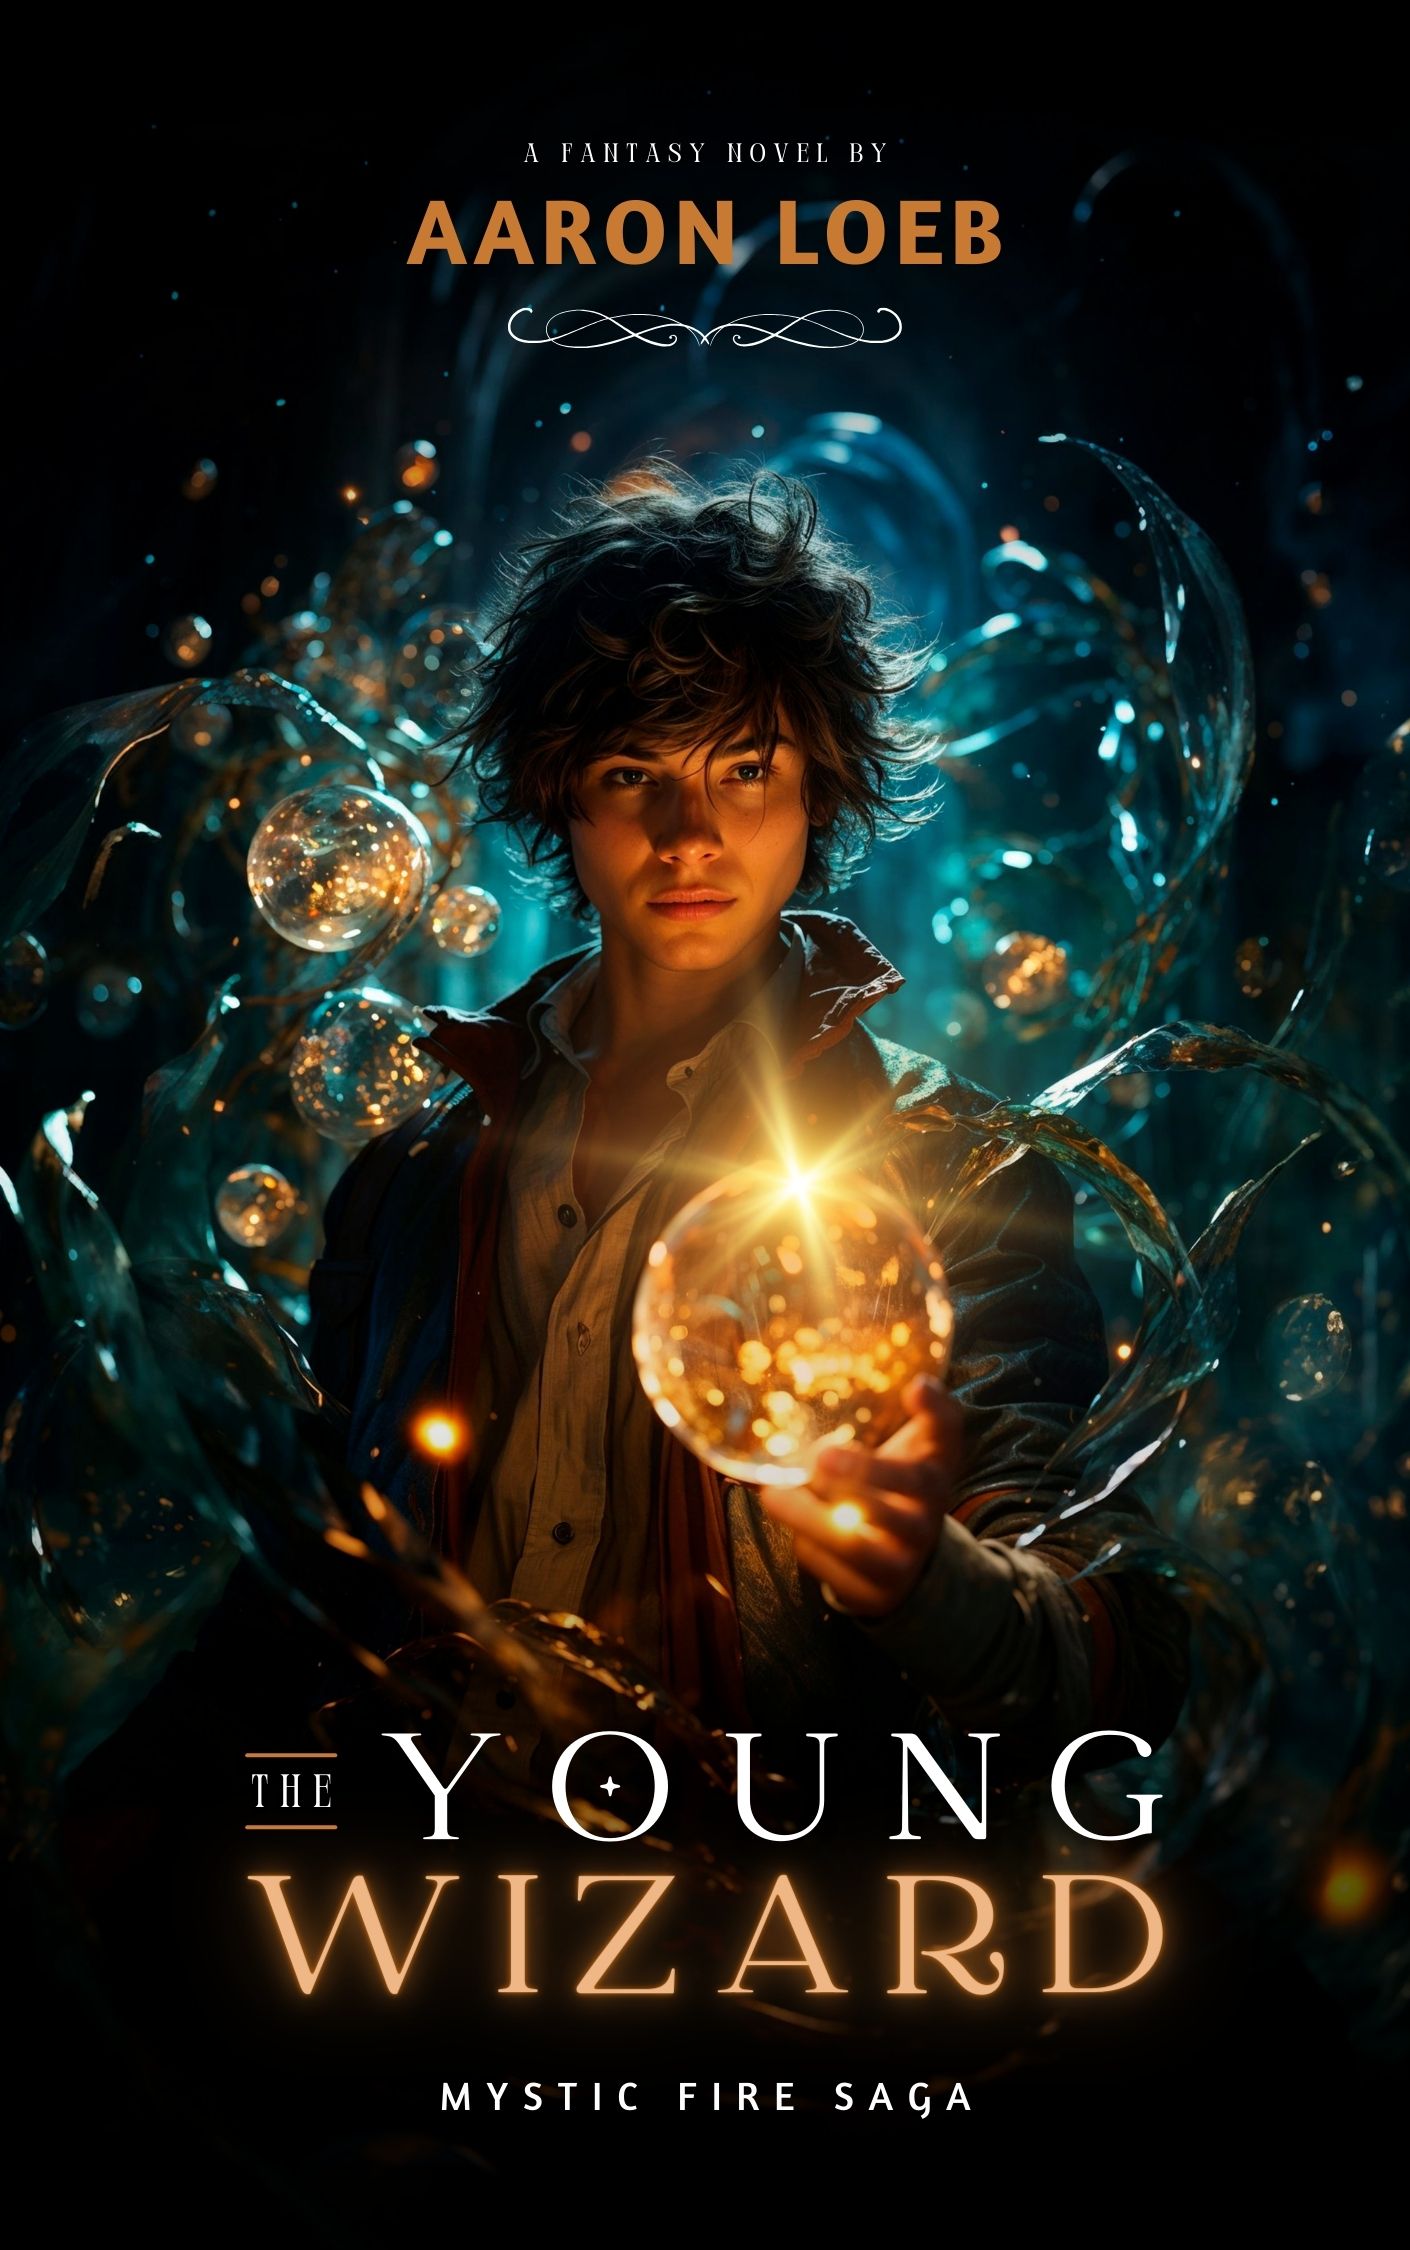 A young wizard, depicted in an image by Aaron Lobb.